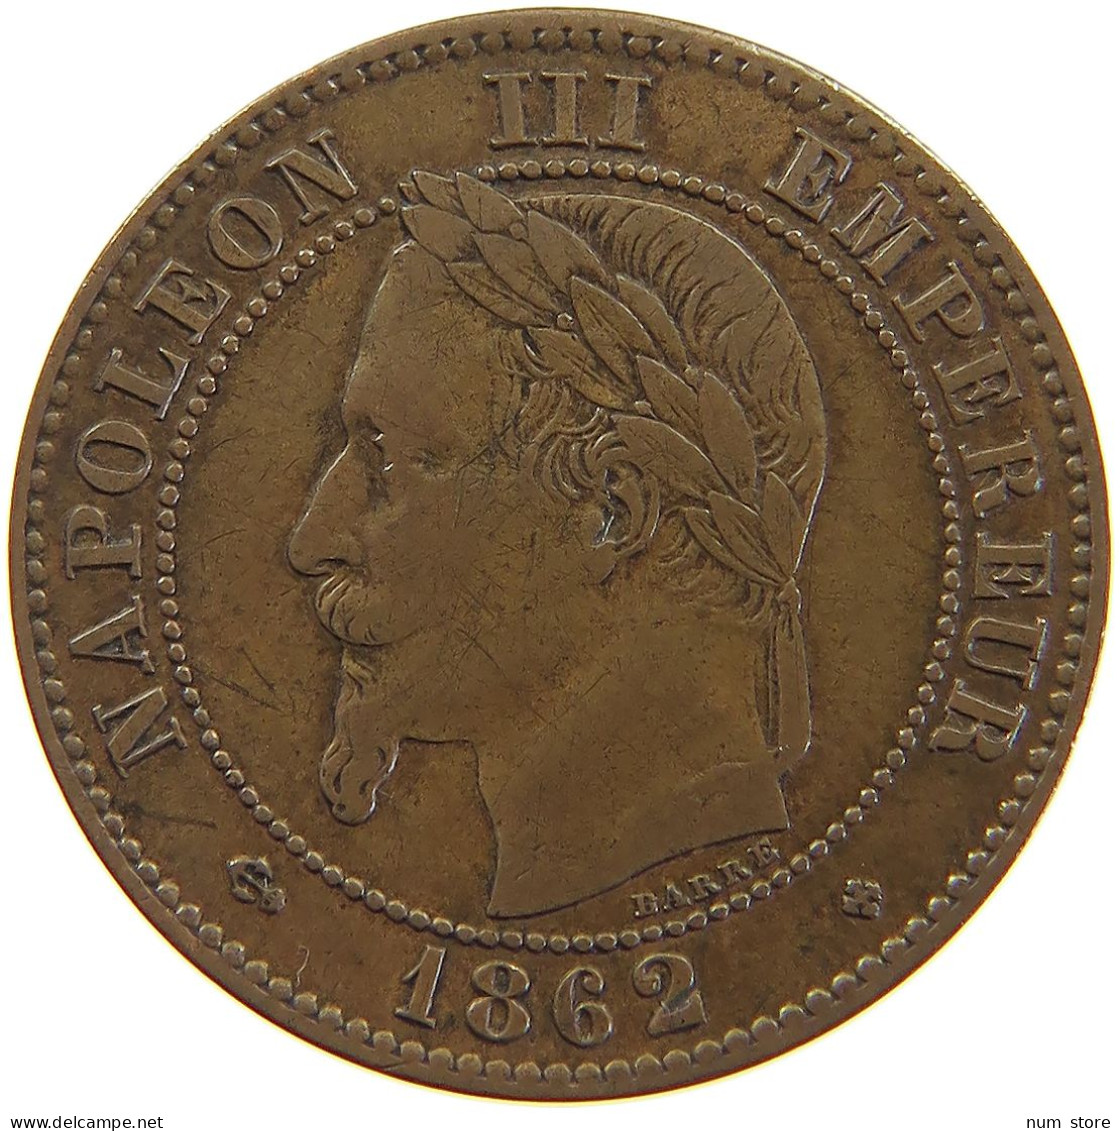 FRANCE 2 CENTIMES 1862 BB Napoleon III. (1852-1870) #a059 0155 - 2 Centimes